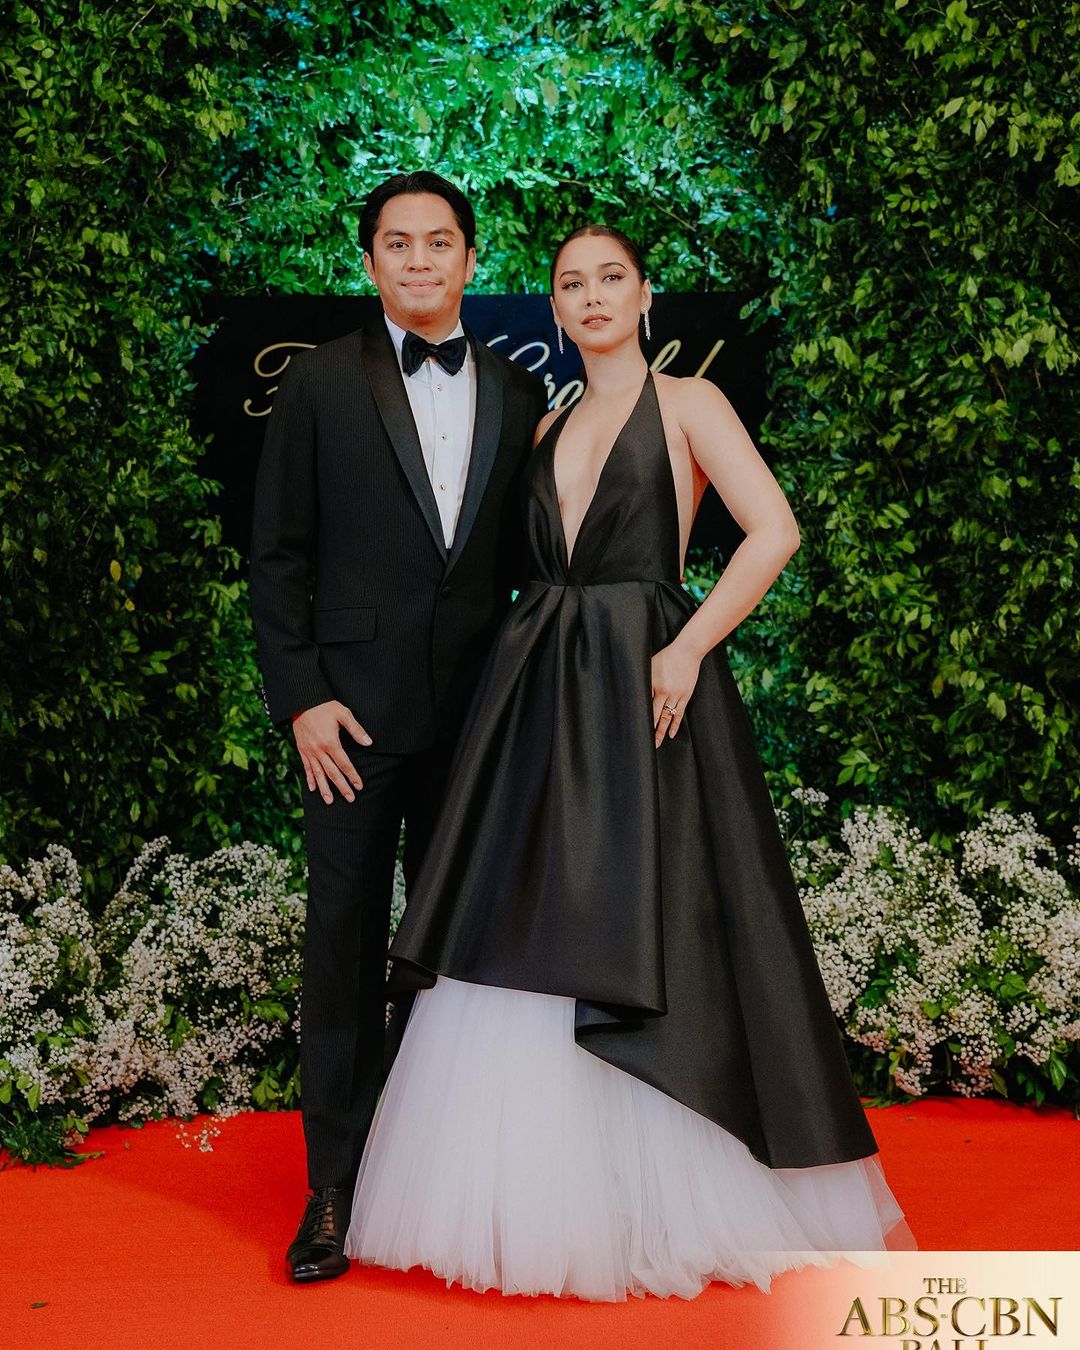 MetroStyleWatch: Avant-Garde Looks At The ABS-CBN Ball 2023